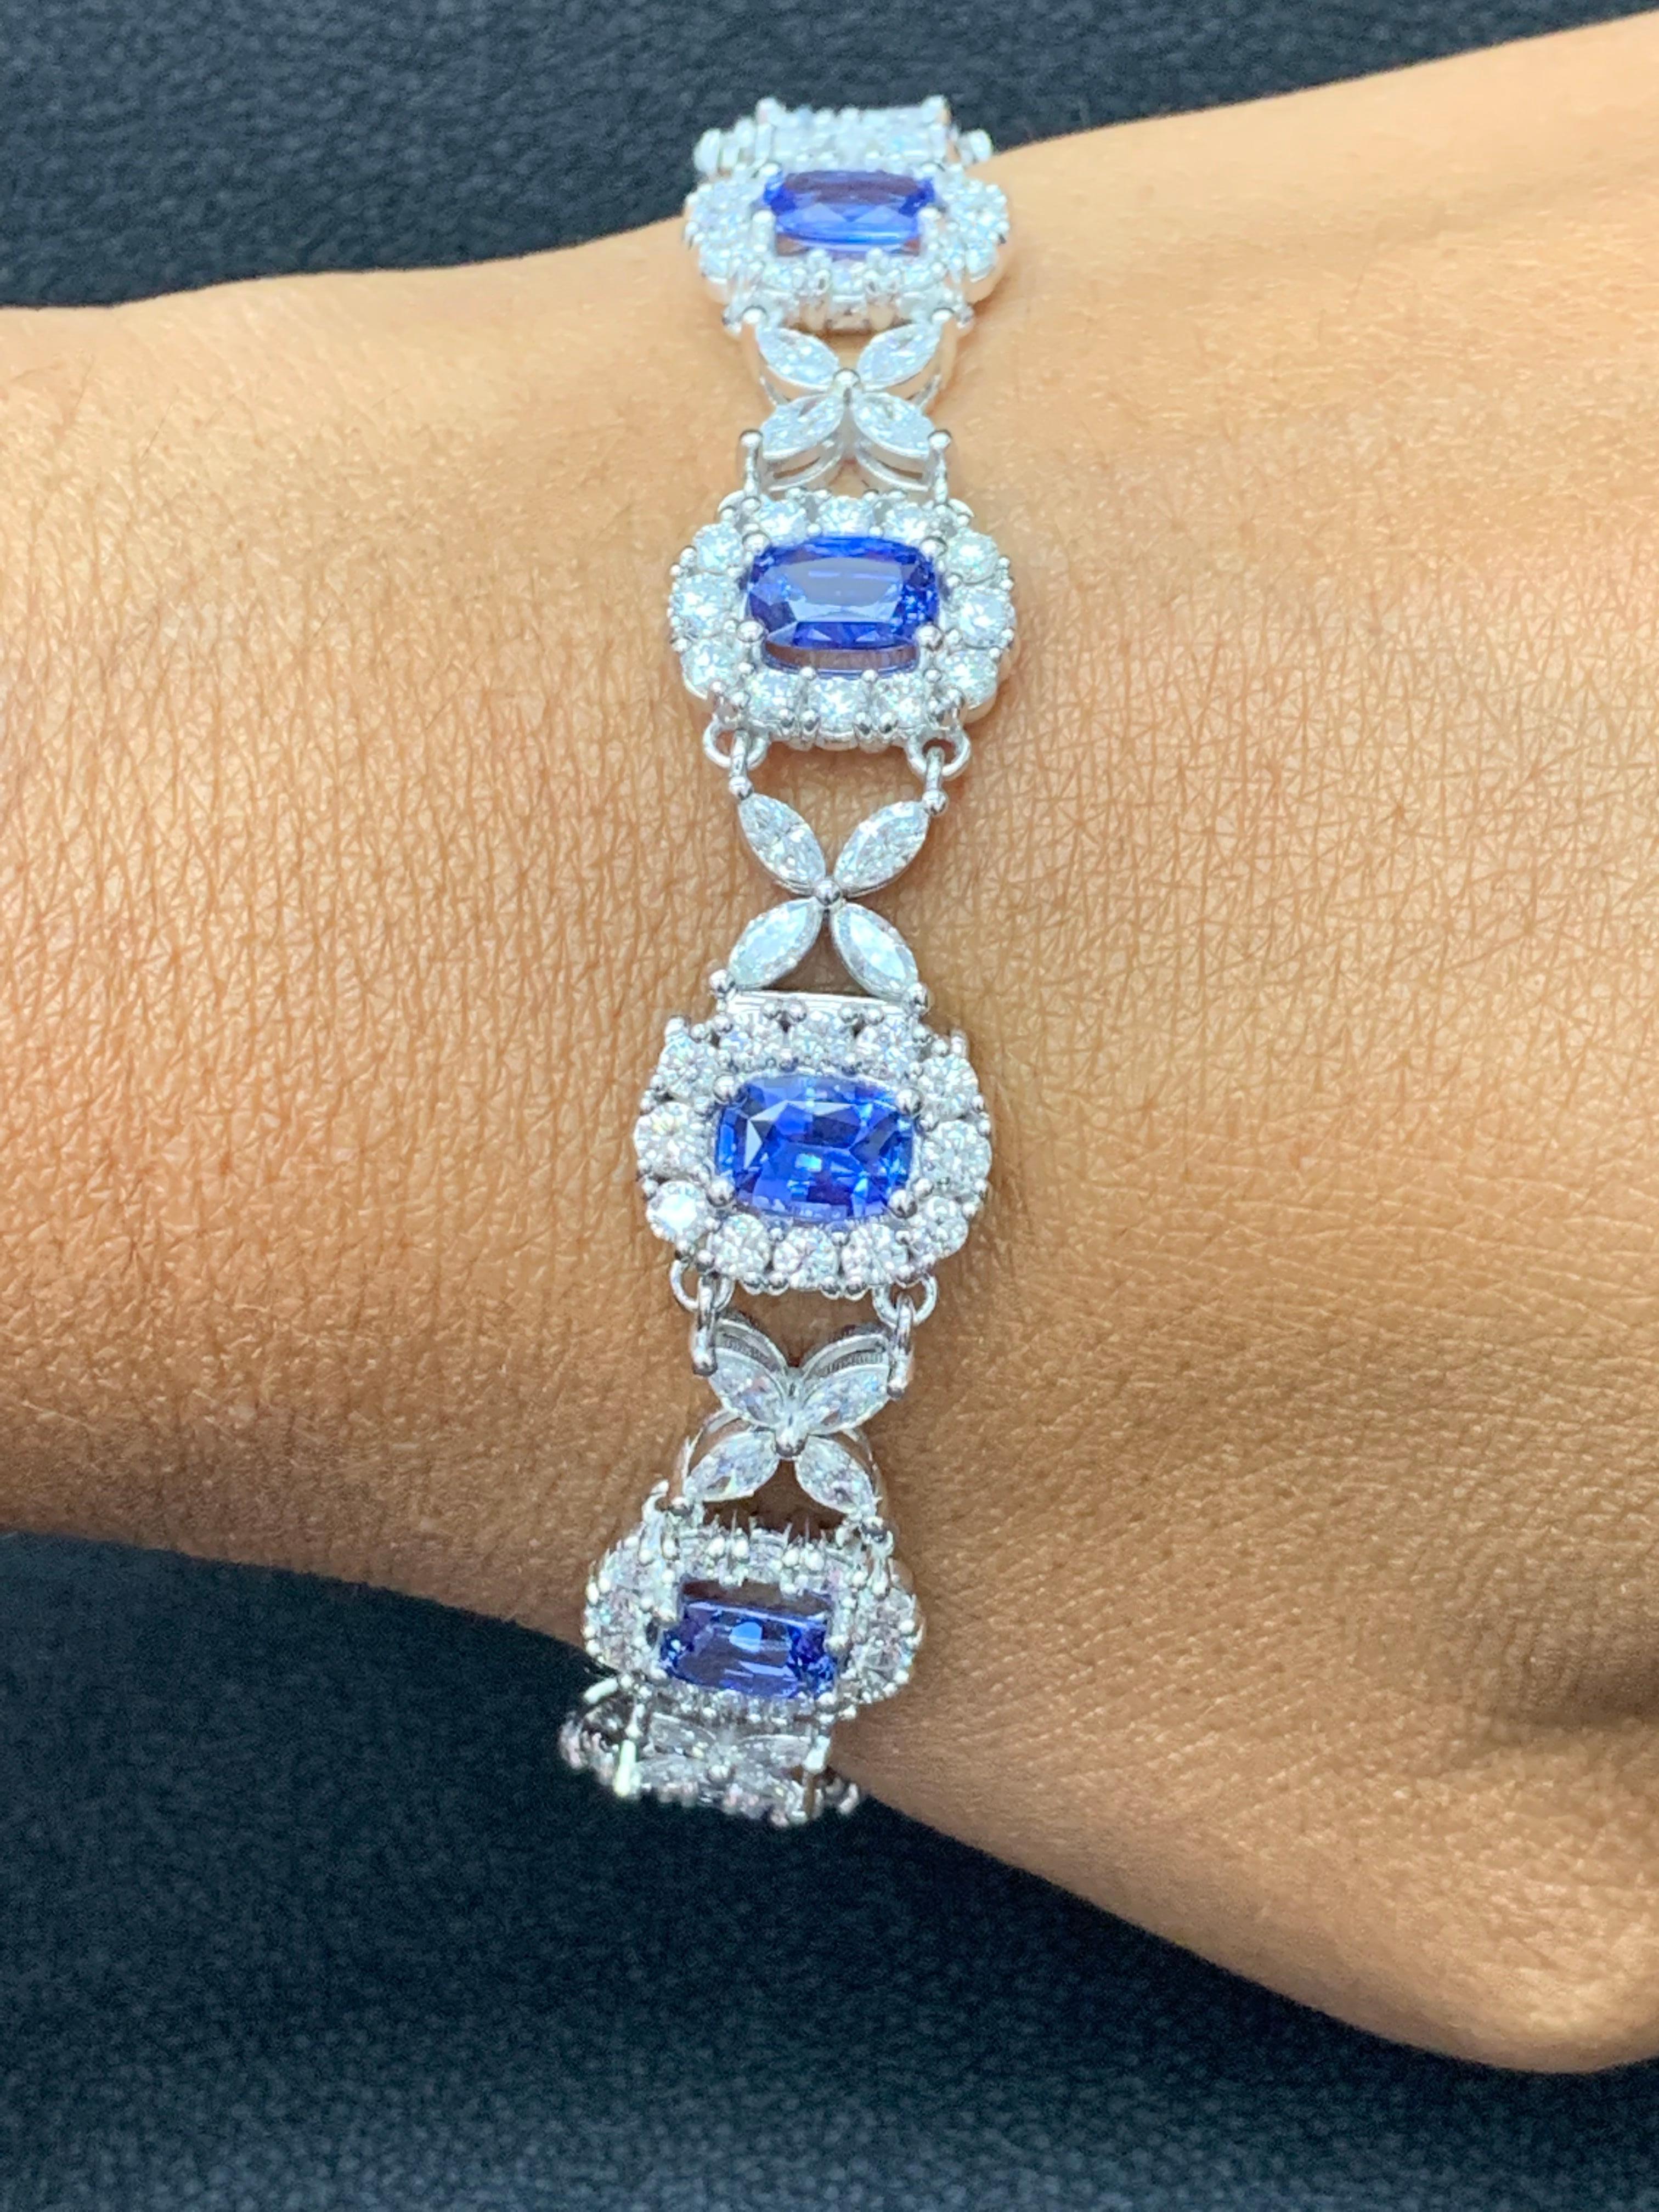 11.47 Carat Oval Cut Blue Sapphire and Diamond Tennis Bracelet in 14K White Gold For Sale 4